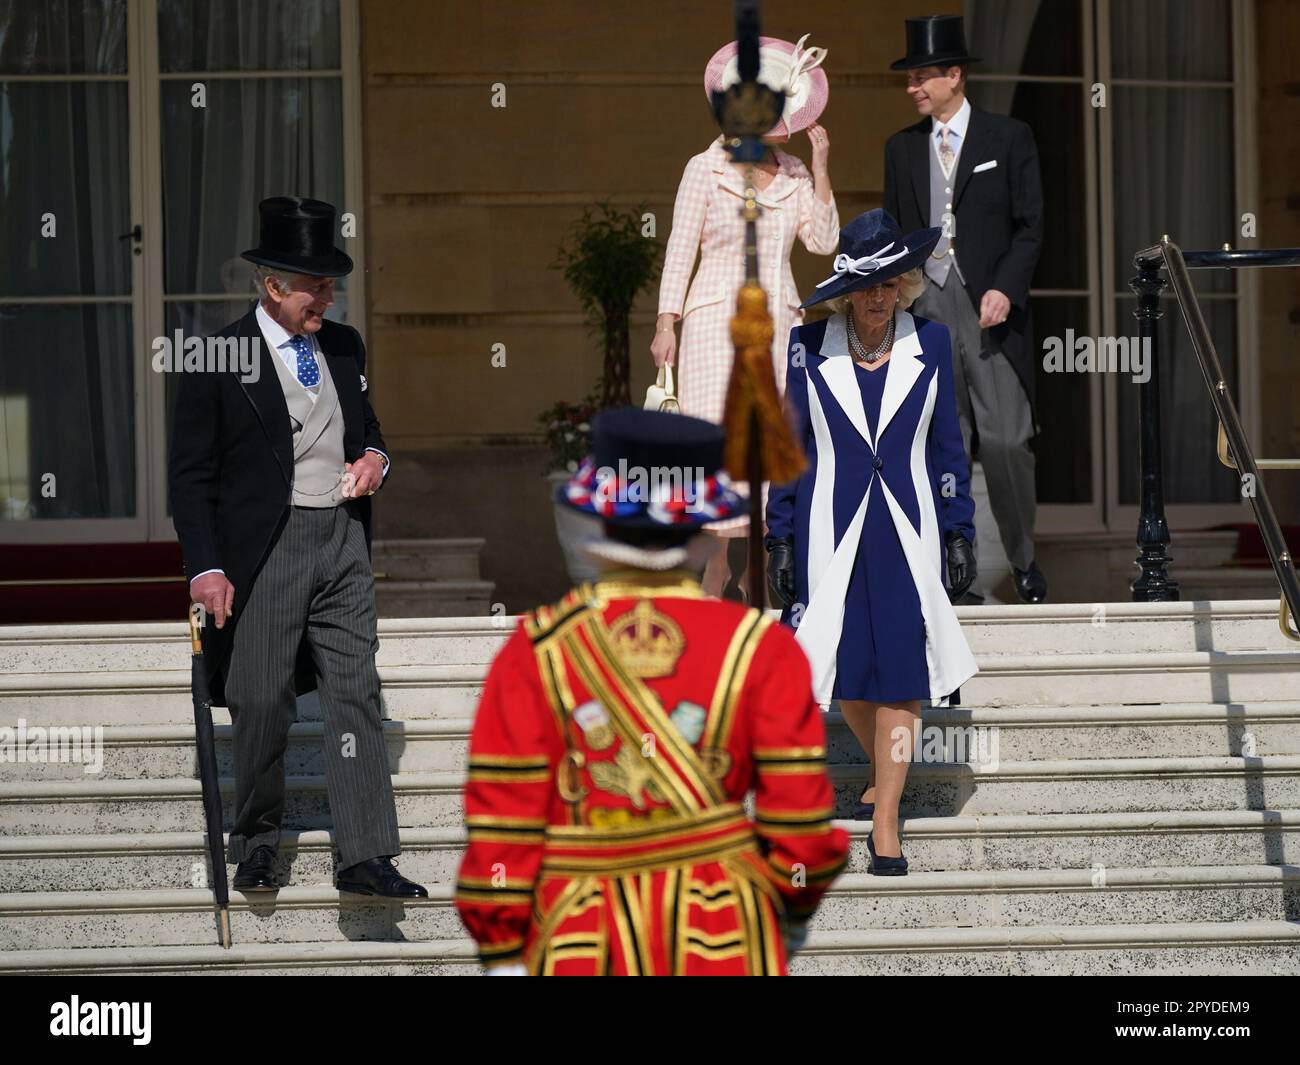 King Charles III and the Queen Consort during a Garden Party at